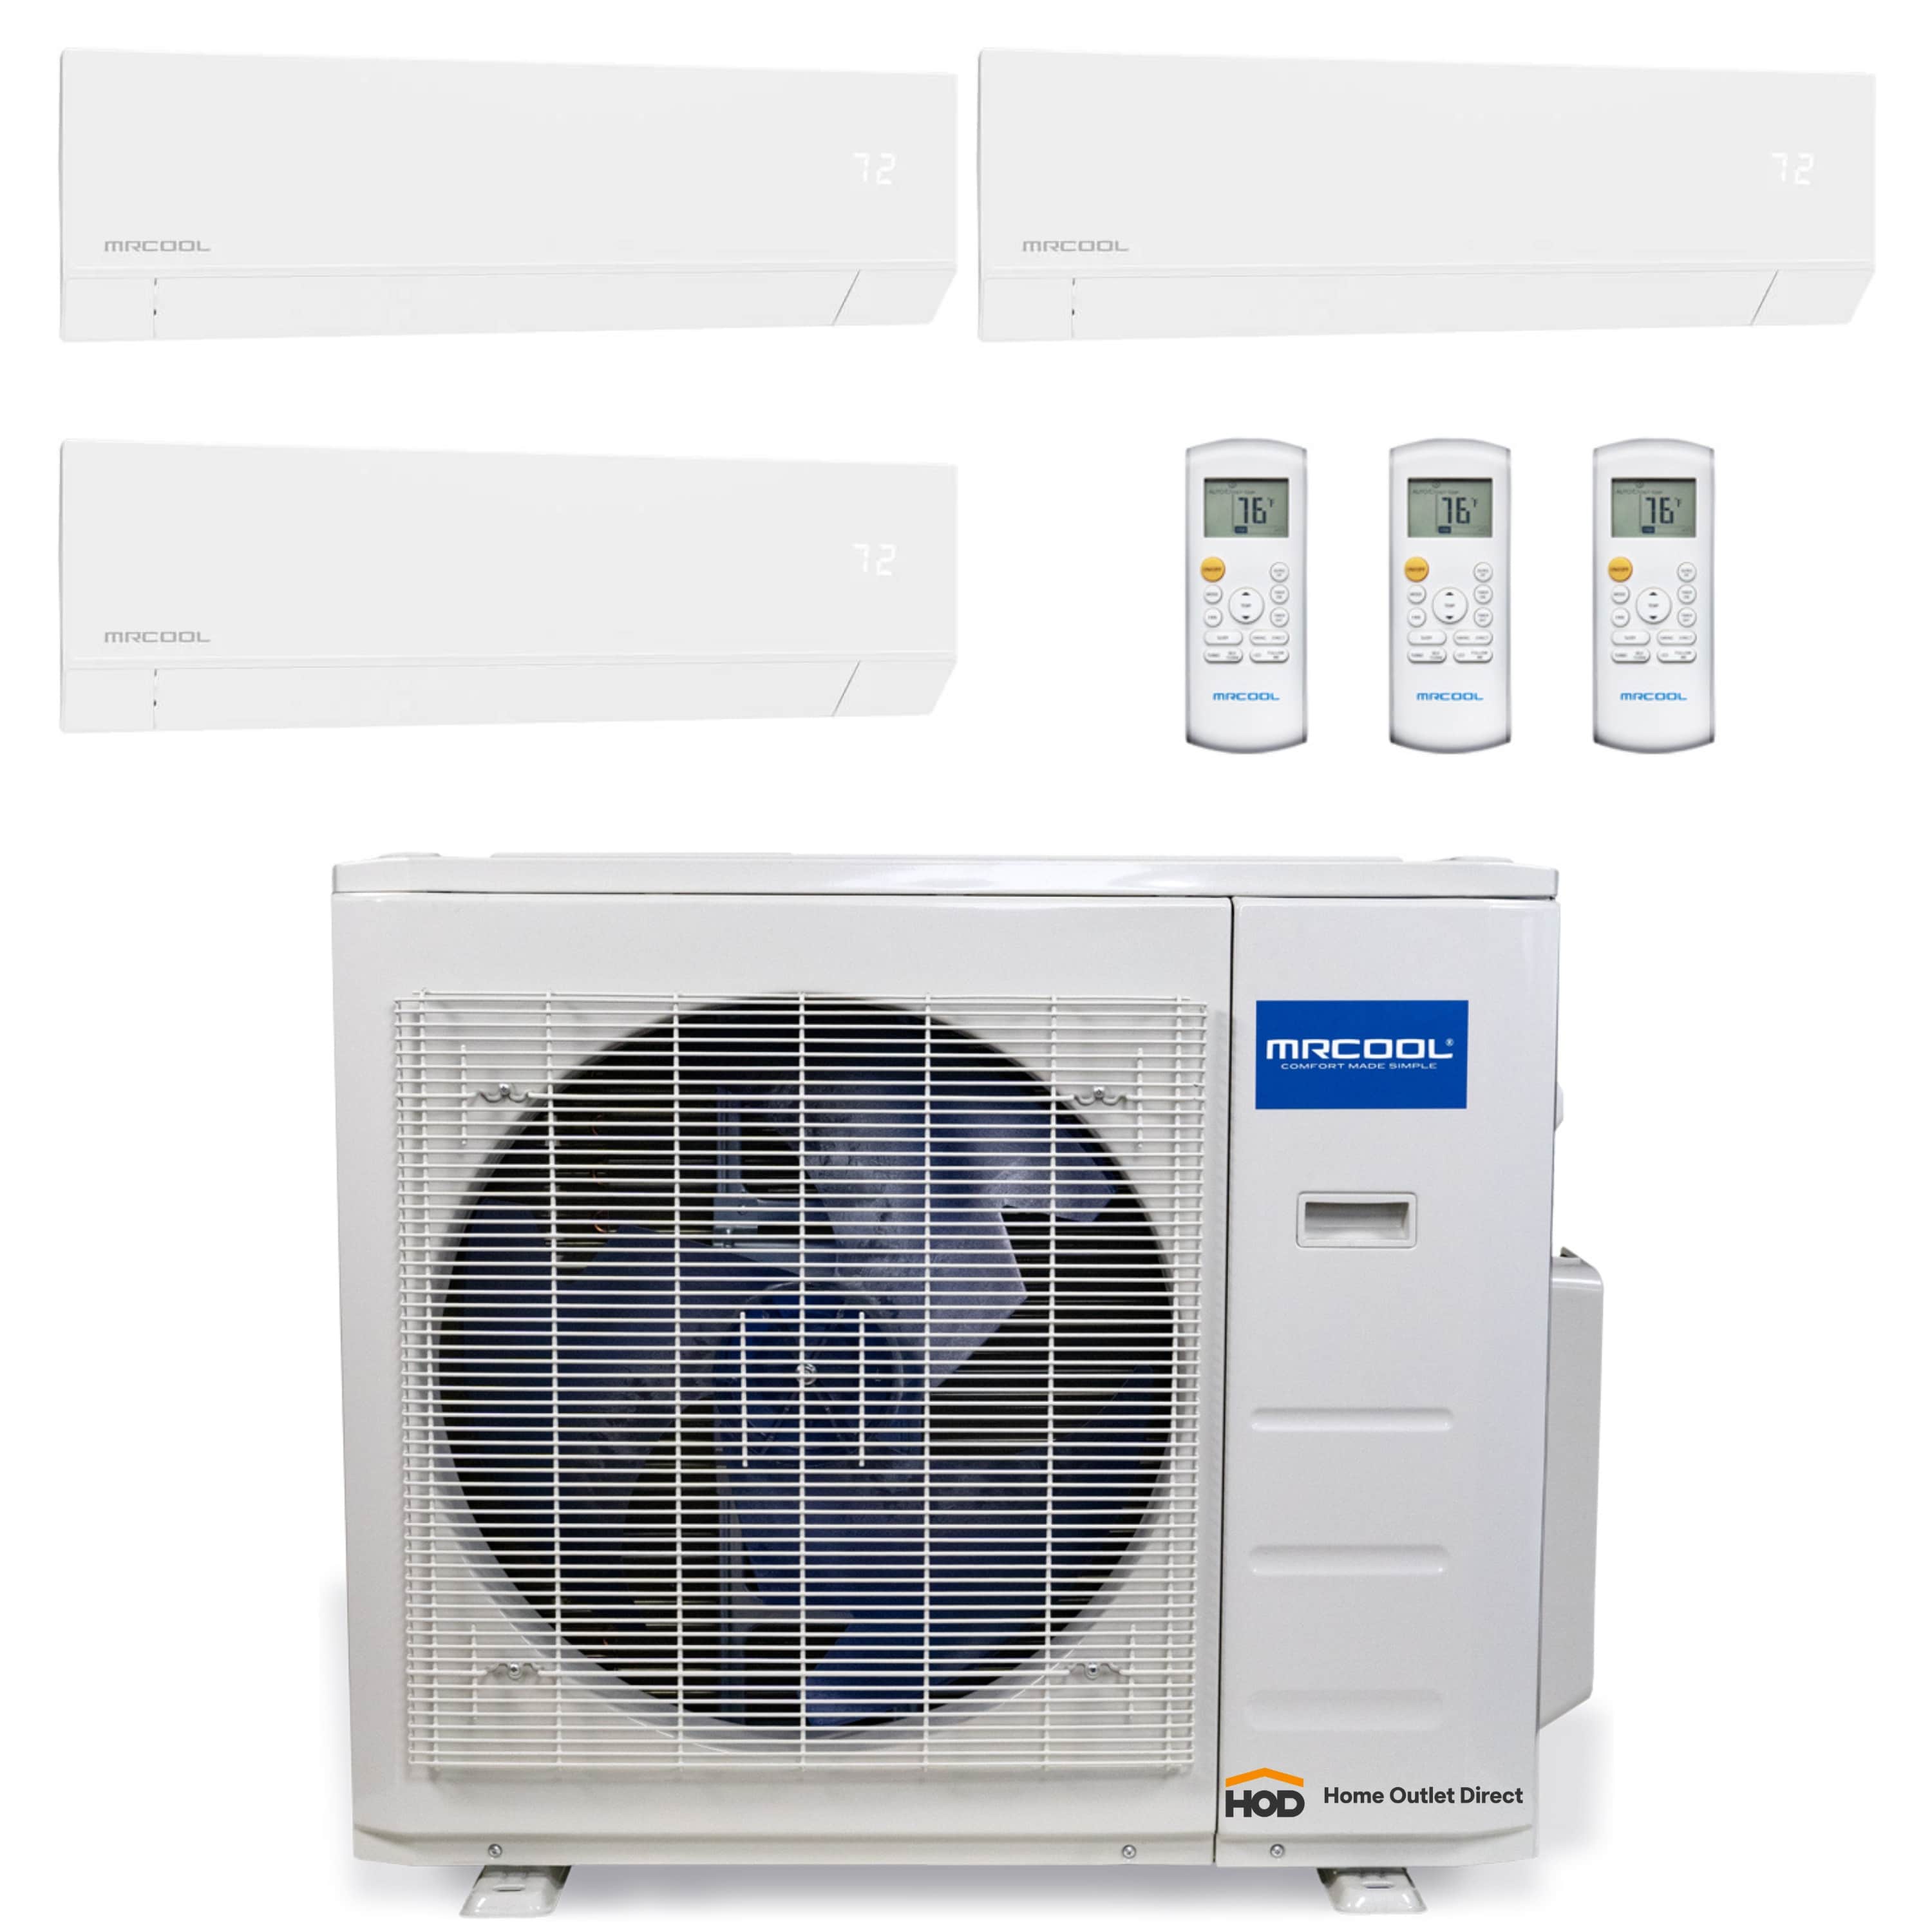 MRCOOL Olympus Mini Split - 3-Zone 36,000 BTU Ductless Air Conditioner and Heat Pump with 12K + 12K + 12K Wall Mount Air Handlers